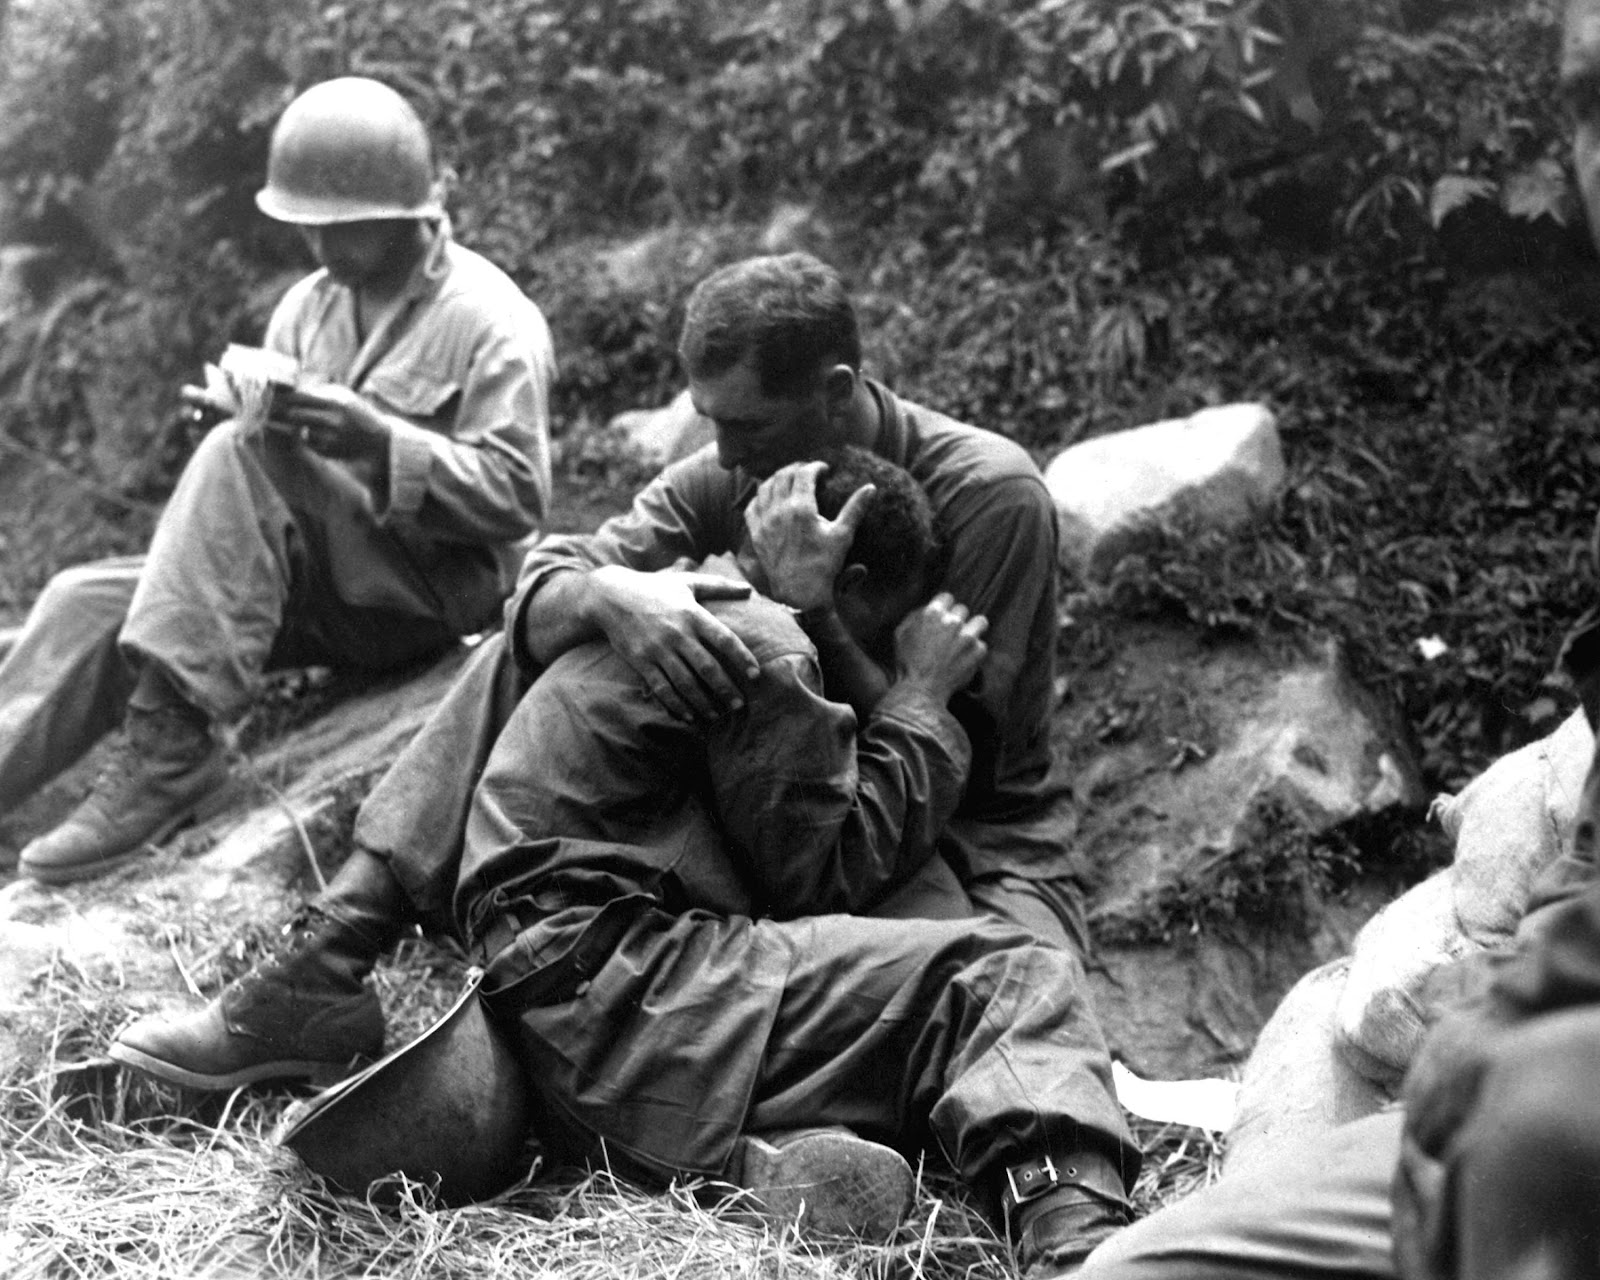 Soldiers comfort each other during the Korean war in the early 1950’s